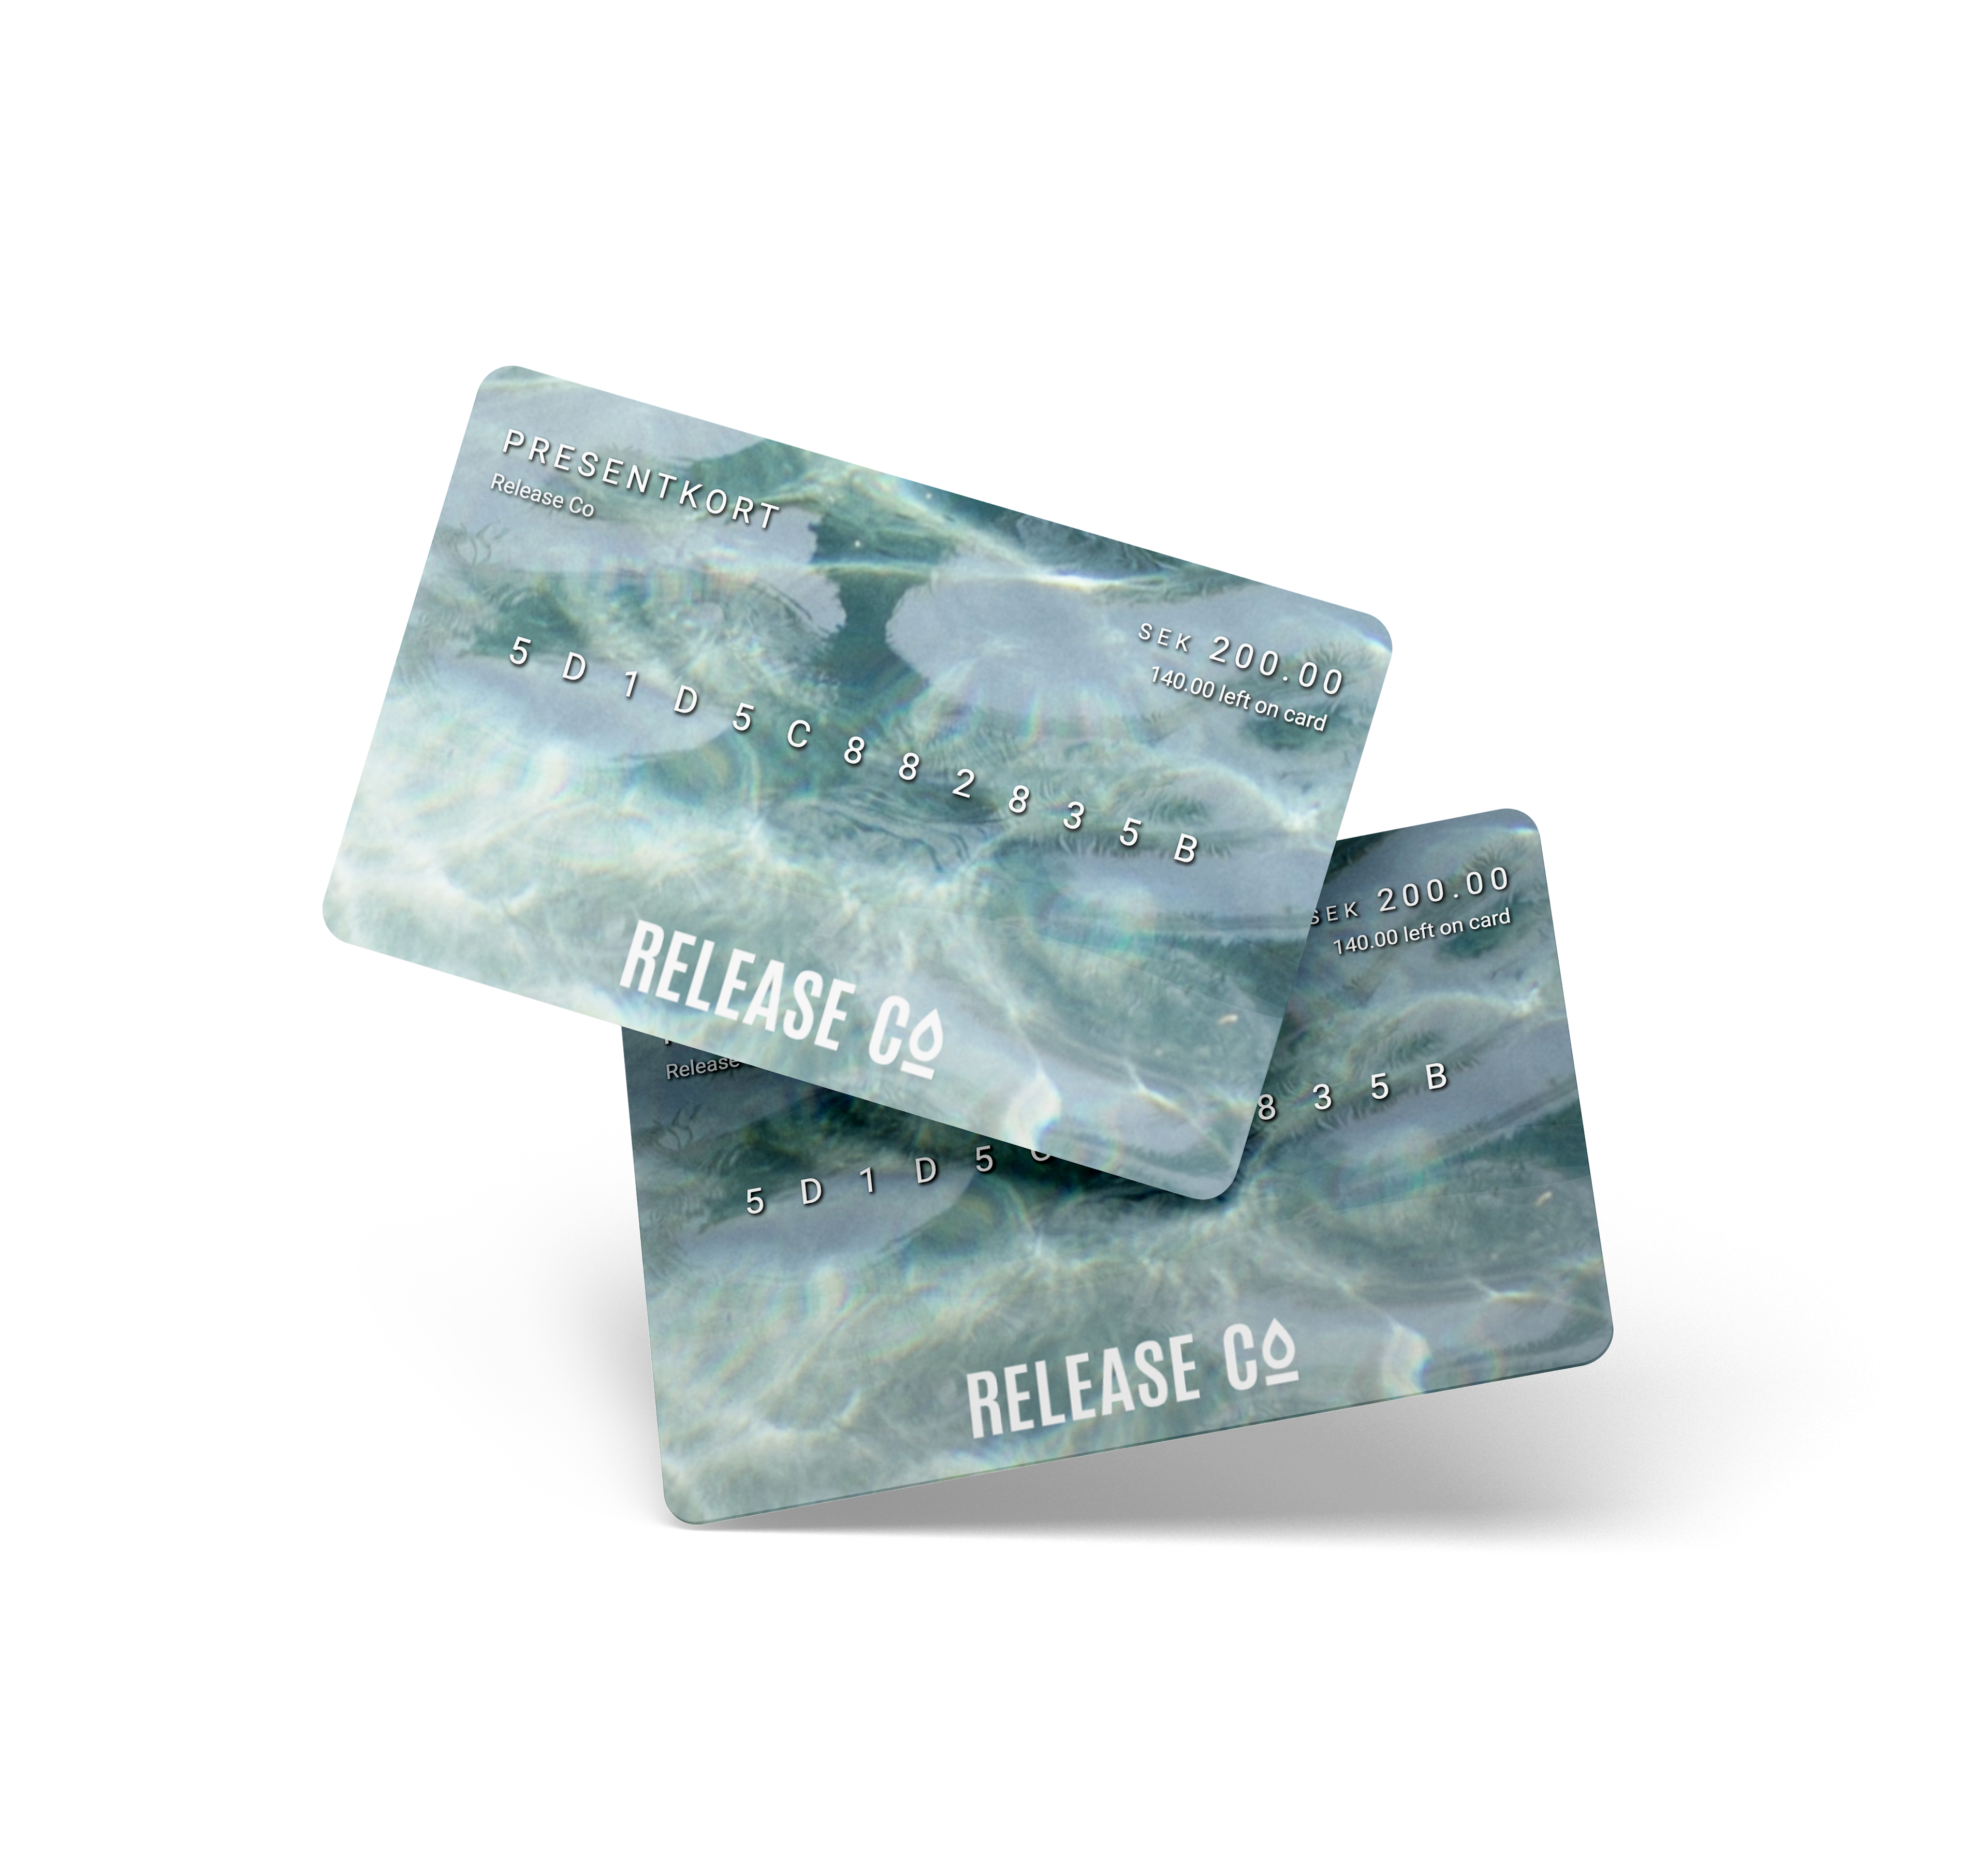 Two ReleaseCo giftcards